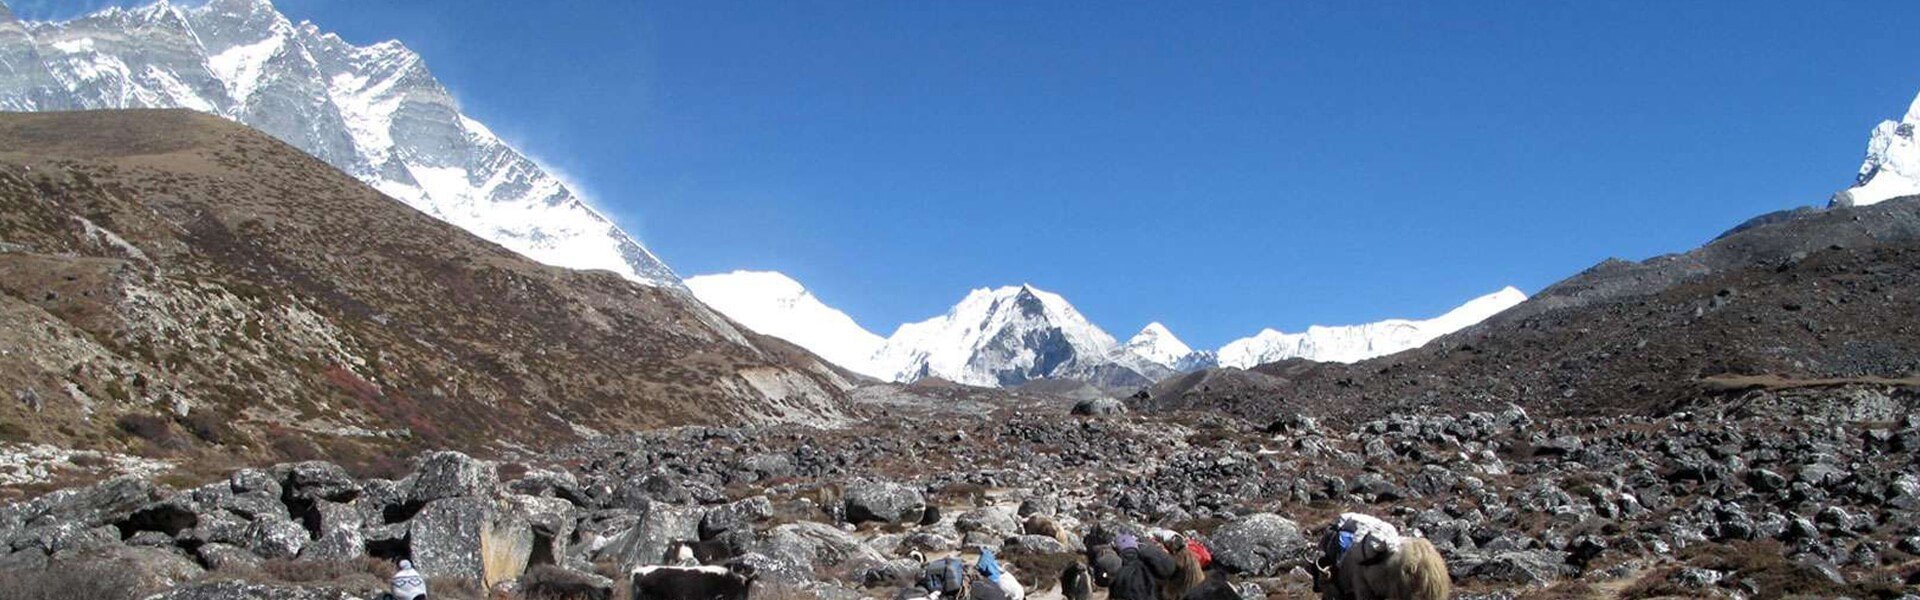 Everest Base Camp Trek Best Time of the year